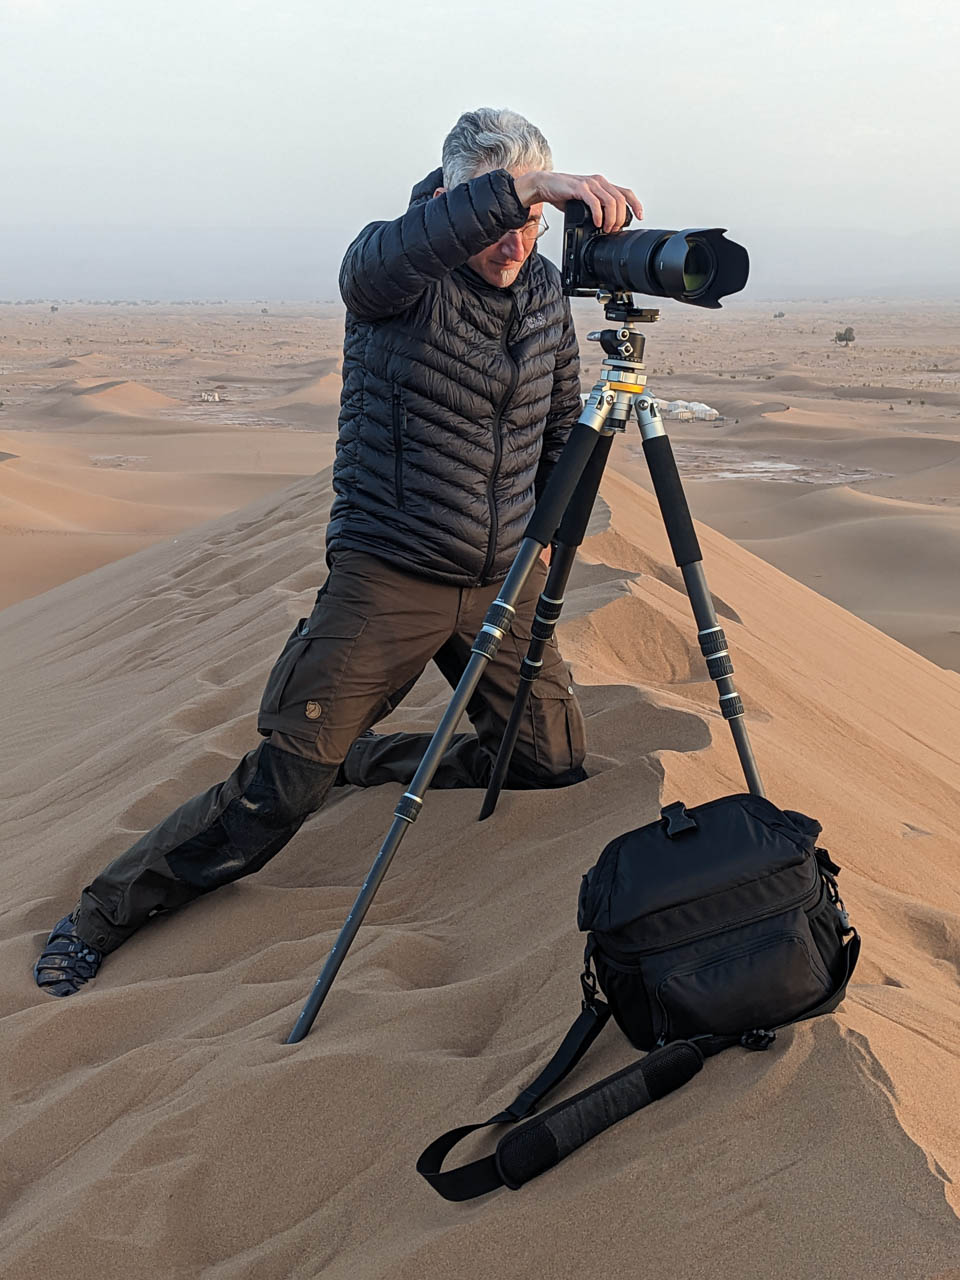 Participant photographing the dunes with a long lens.